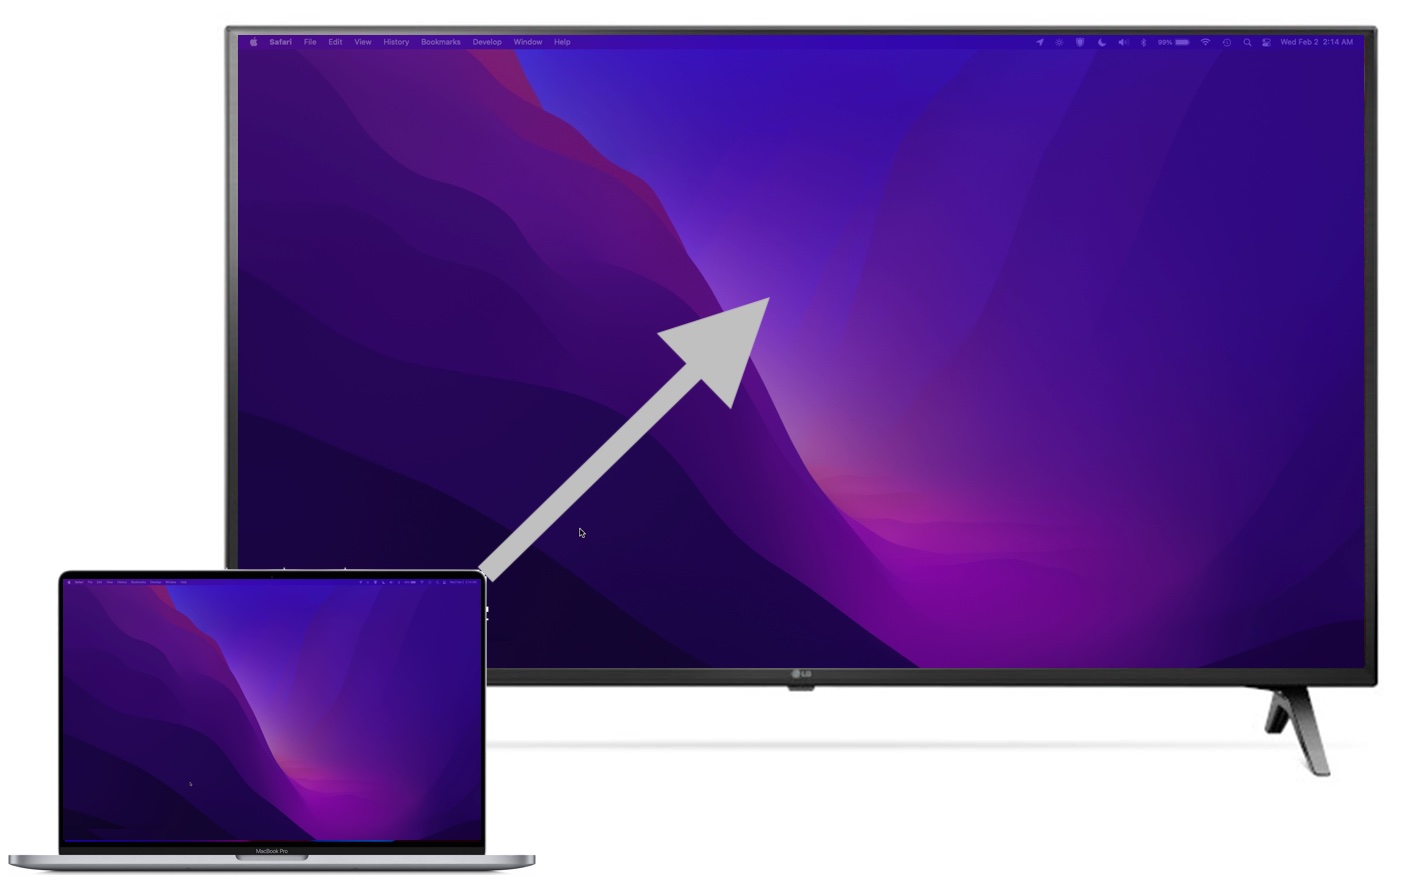 How to Mirror a Mac to TV